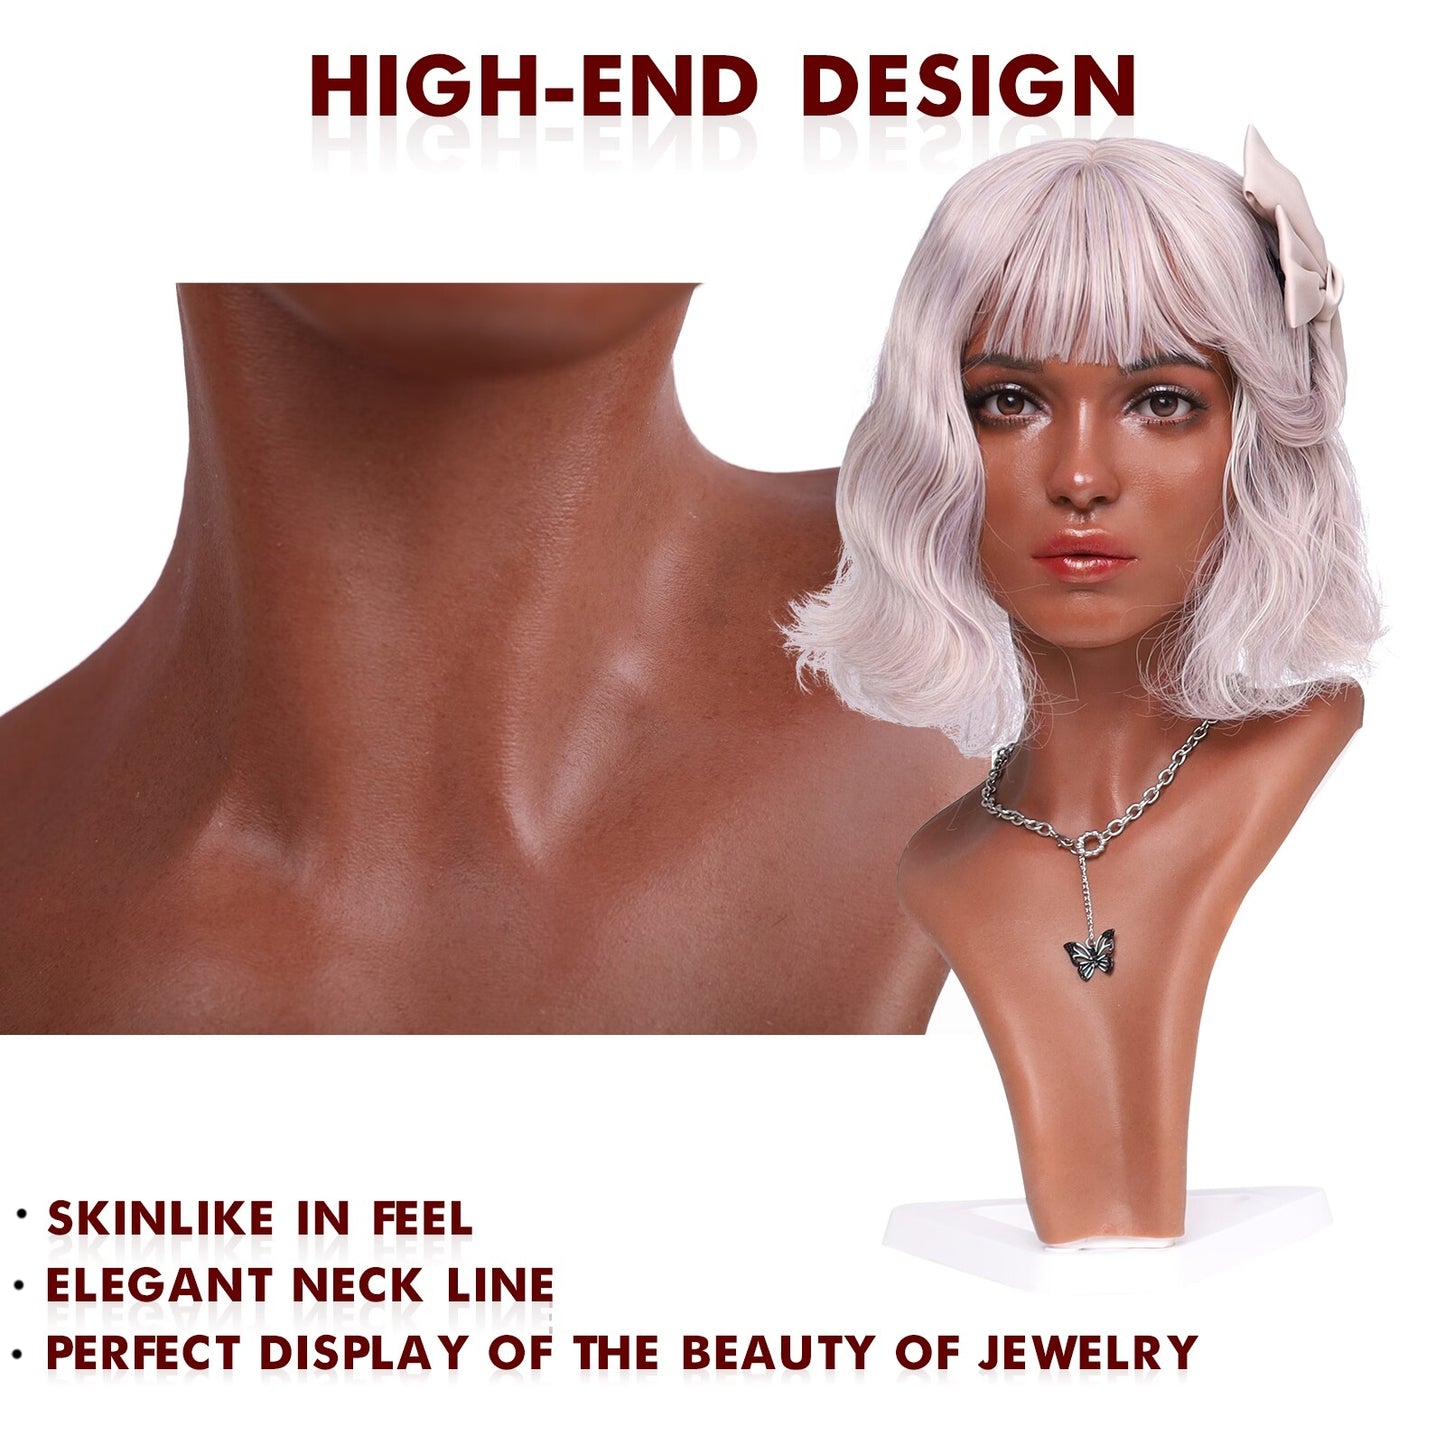 Silicone Female Head Mannequin With Shoulder For Wig Jewelry Display